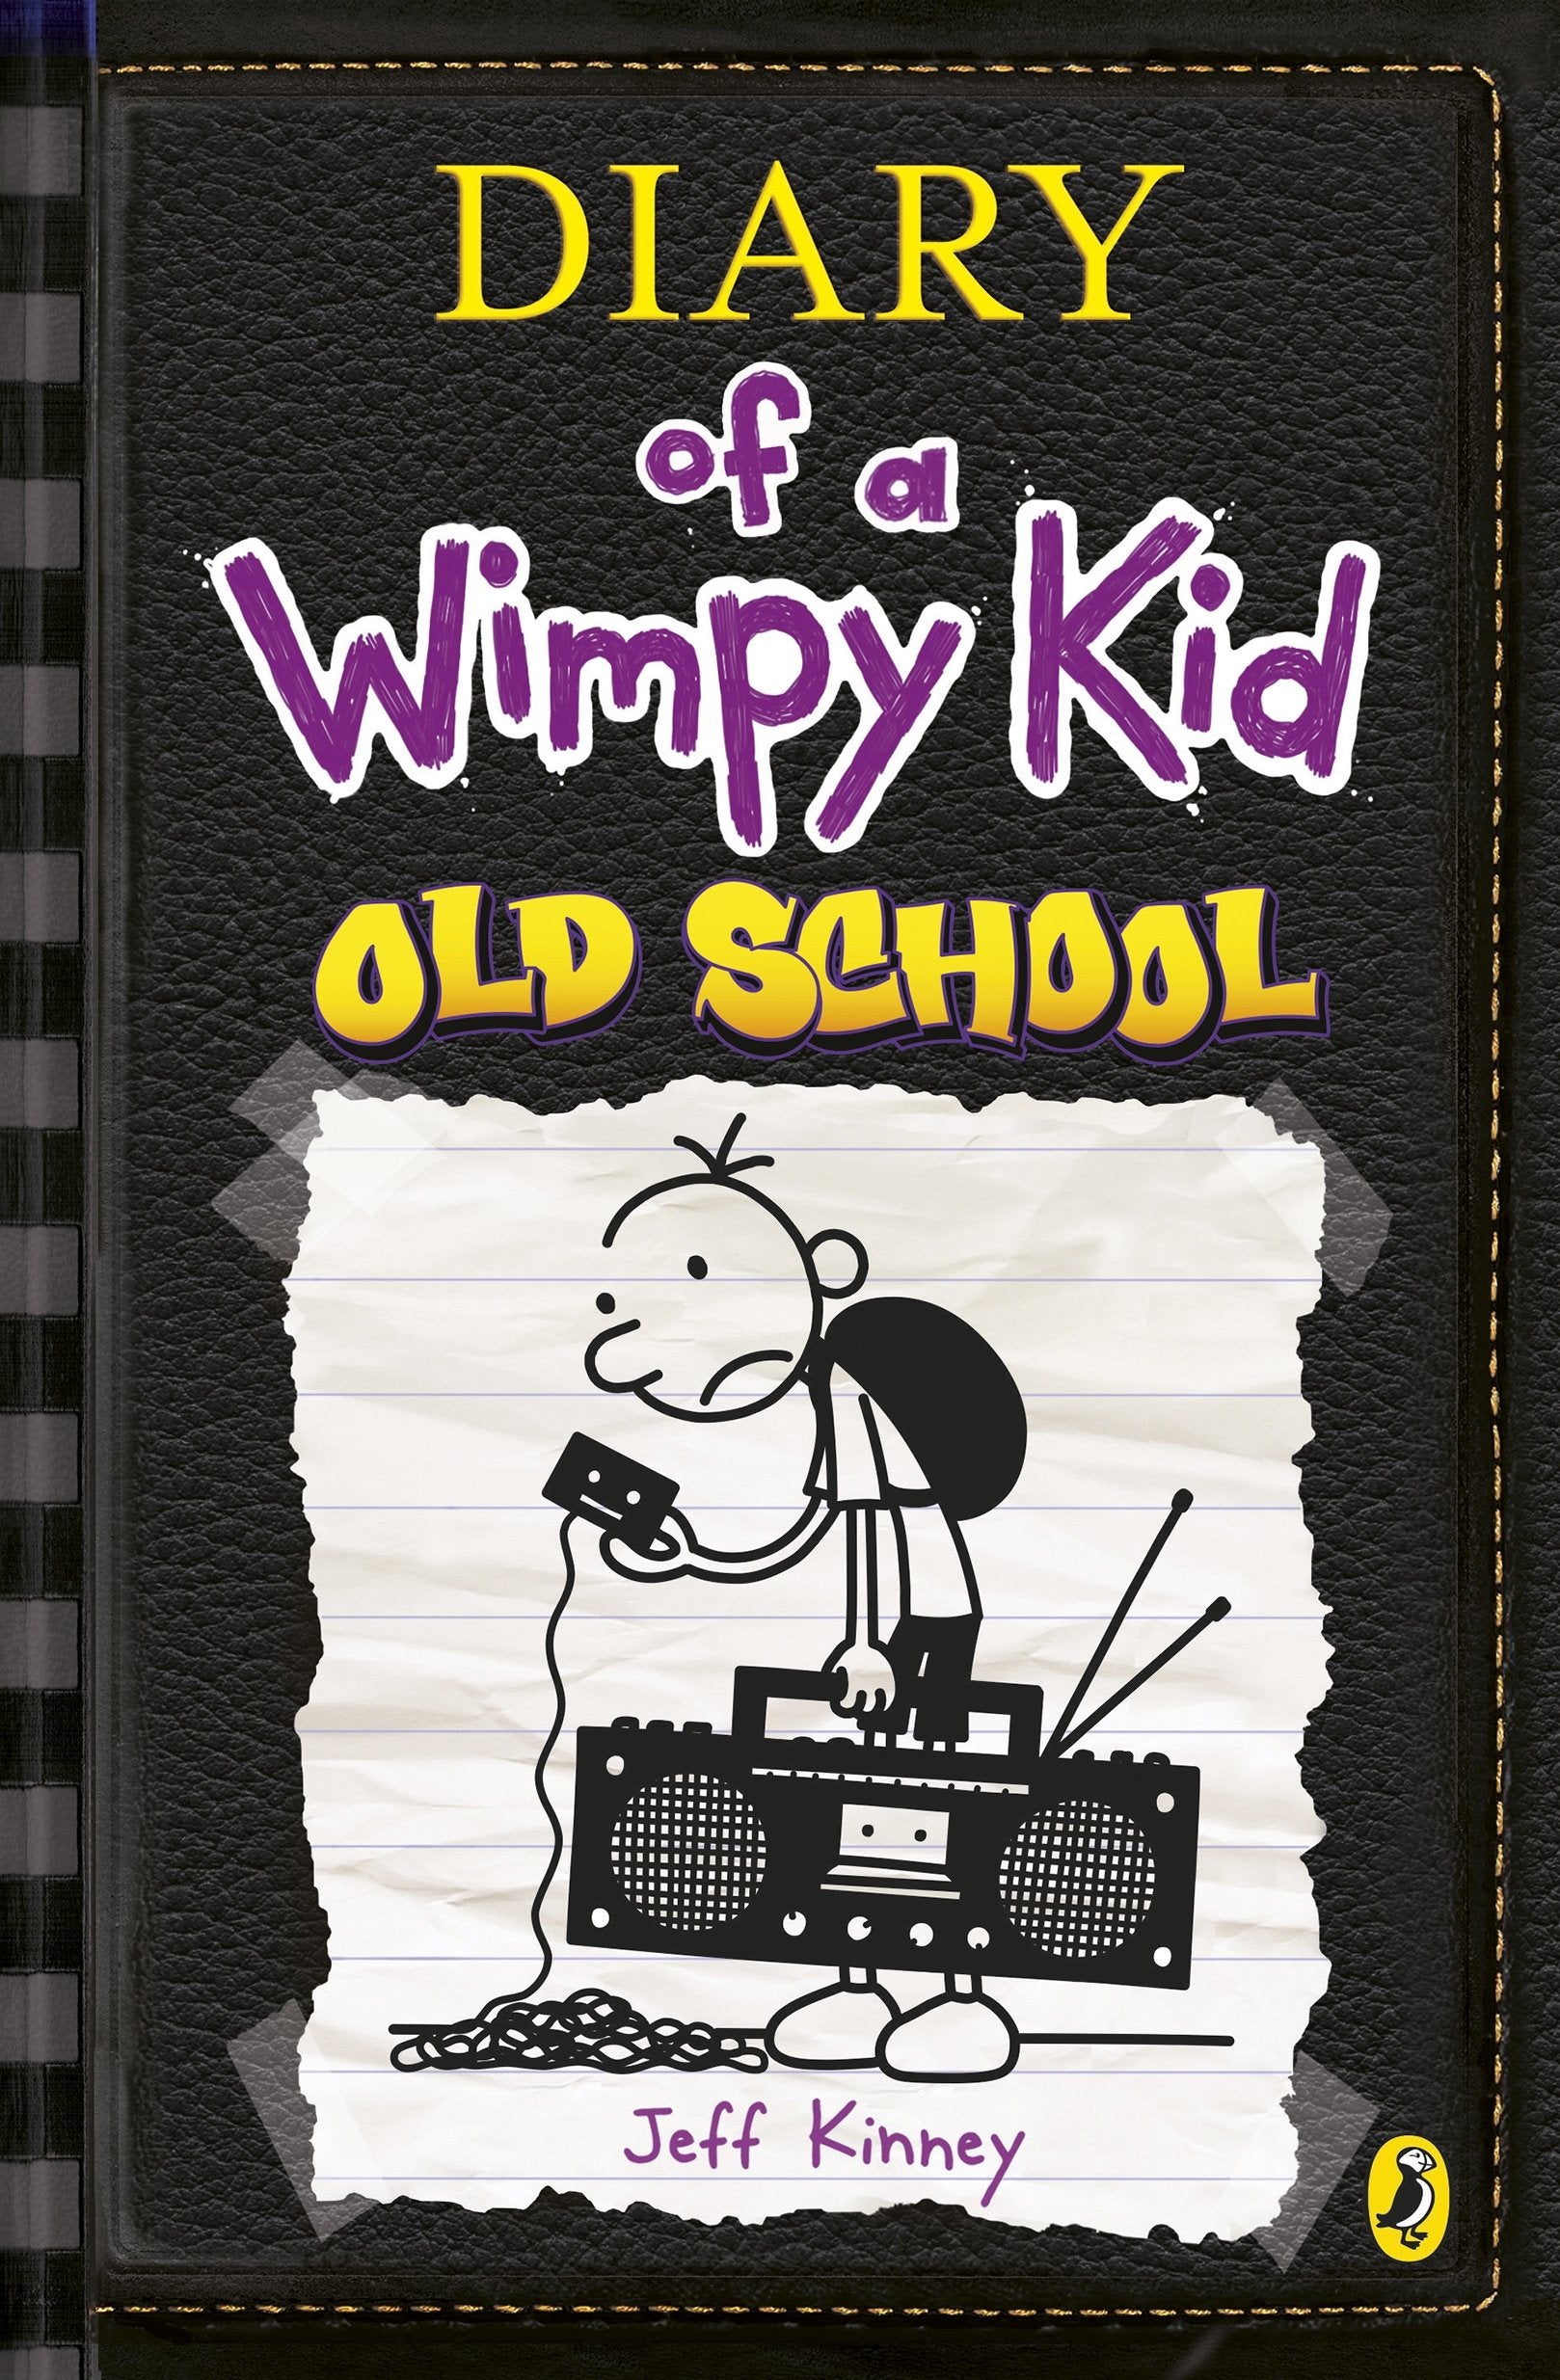 Signed Edition - Old School (Diary of a Wimpy Kid 